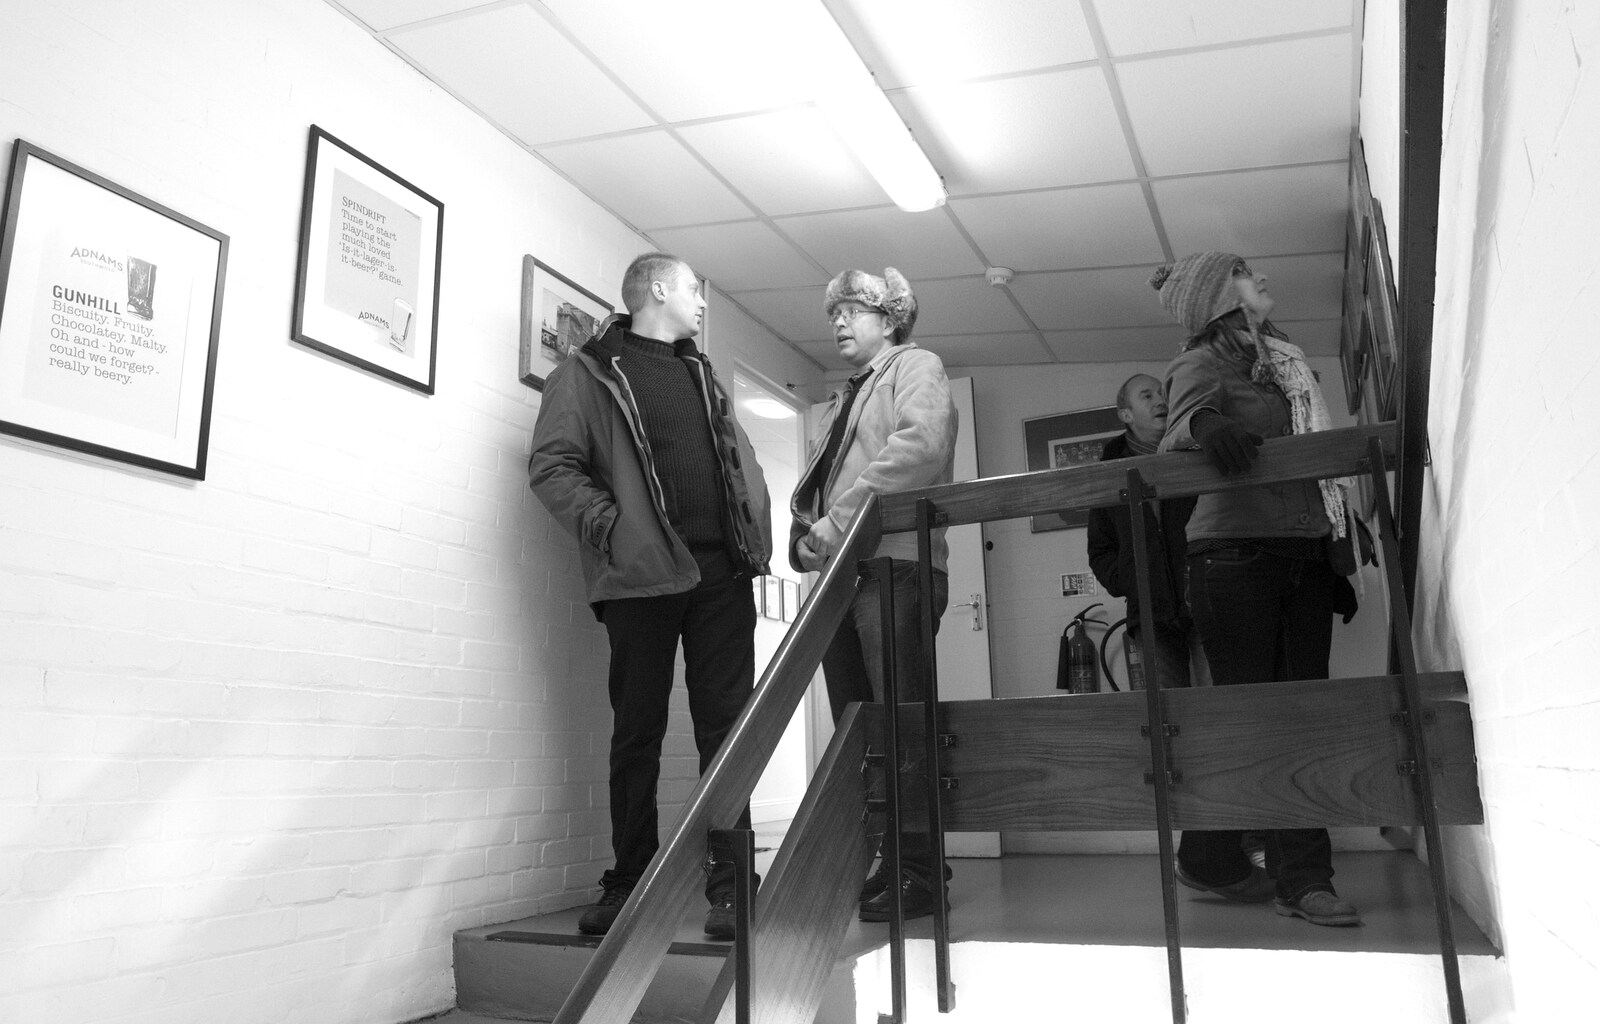 Paul and Marc on the stairs from Apple's Adnams Brewery Birthday Tour, Southwold, Suffolk - 29th November 2012